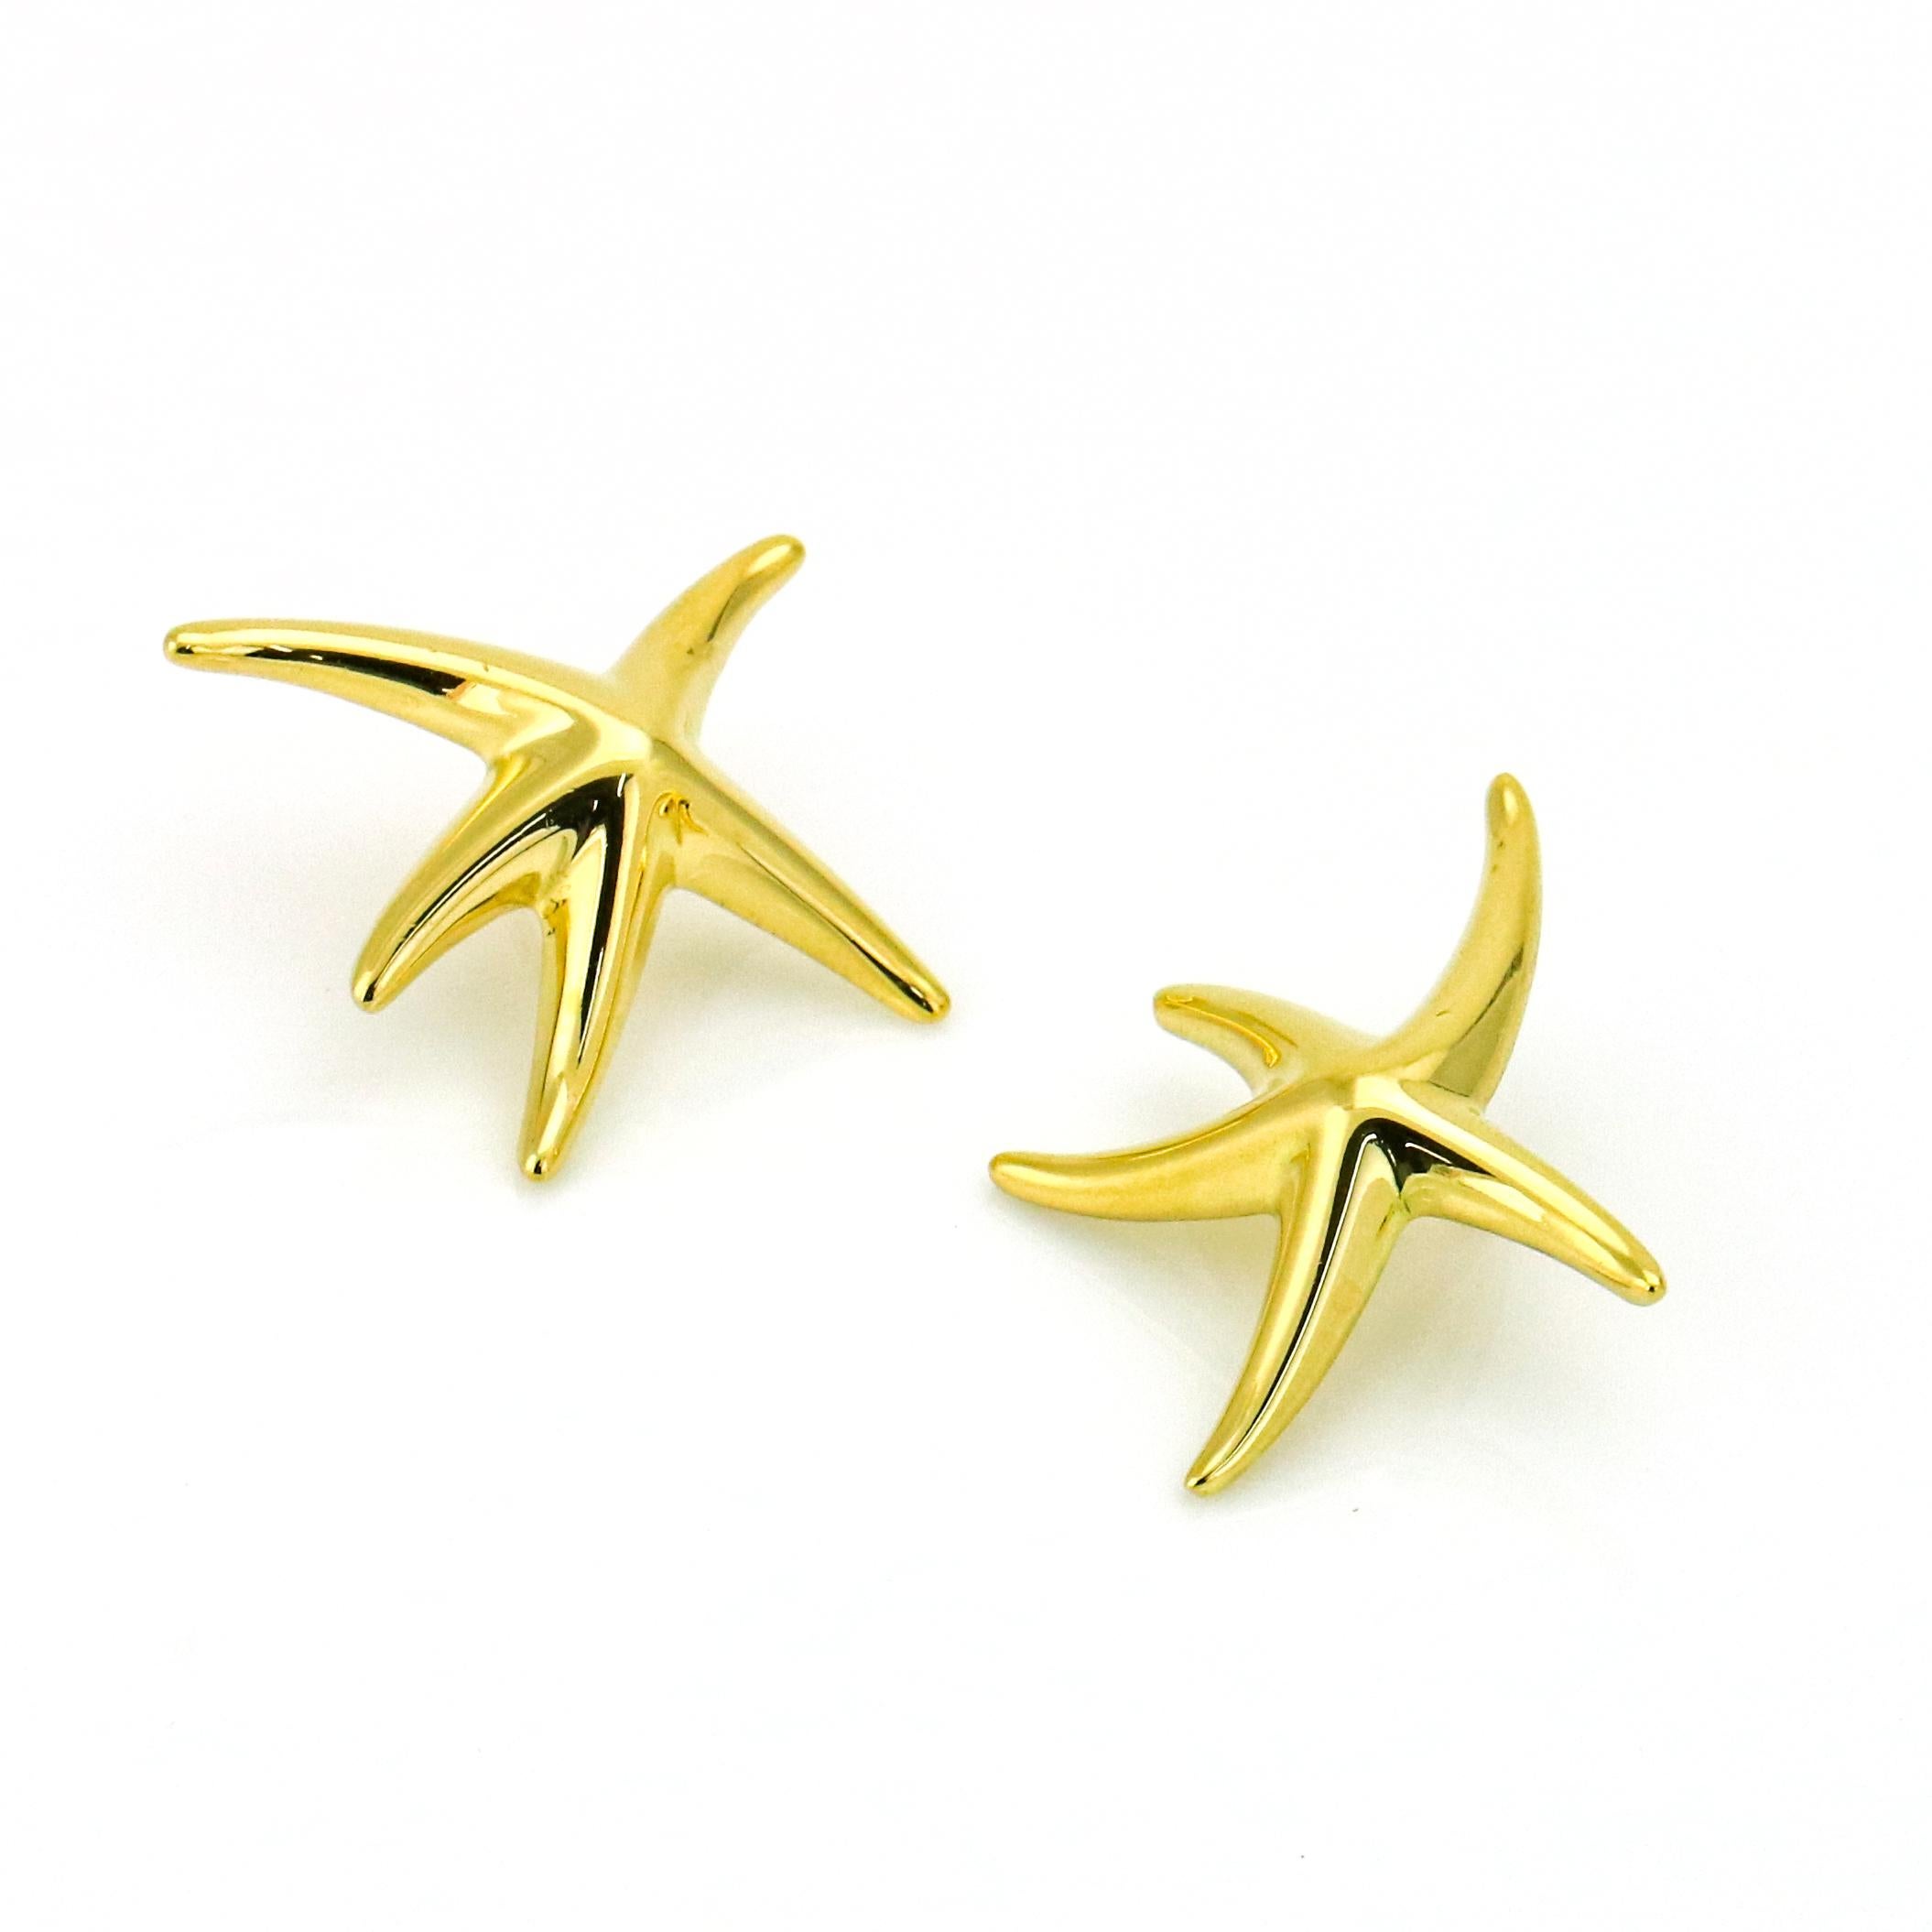 Tiffany & Co. Elsa Peretti 18 Karat Yellow Gold Starfish Earrings In Good Condition For Sale In Fort Lauderdale, FL